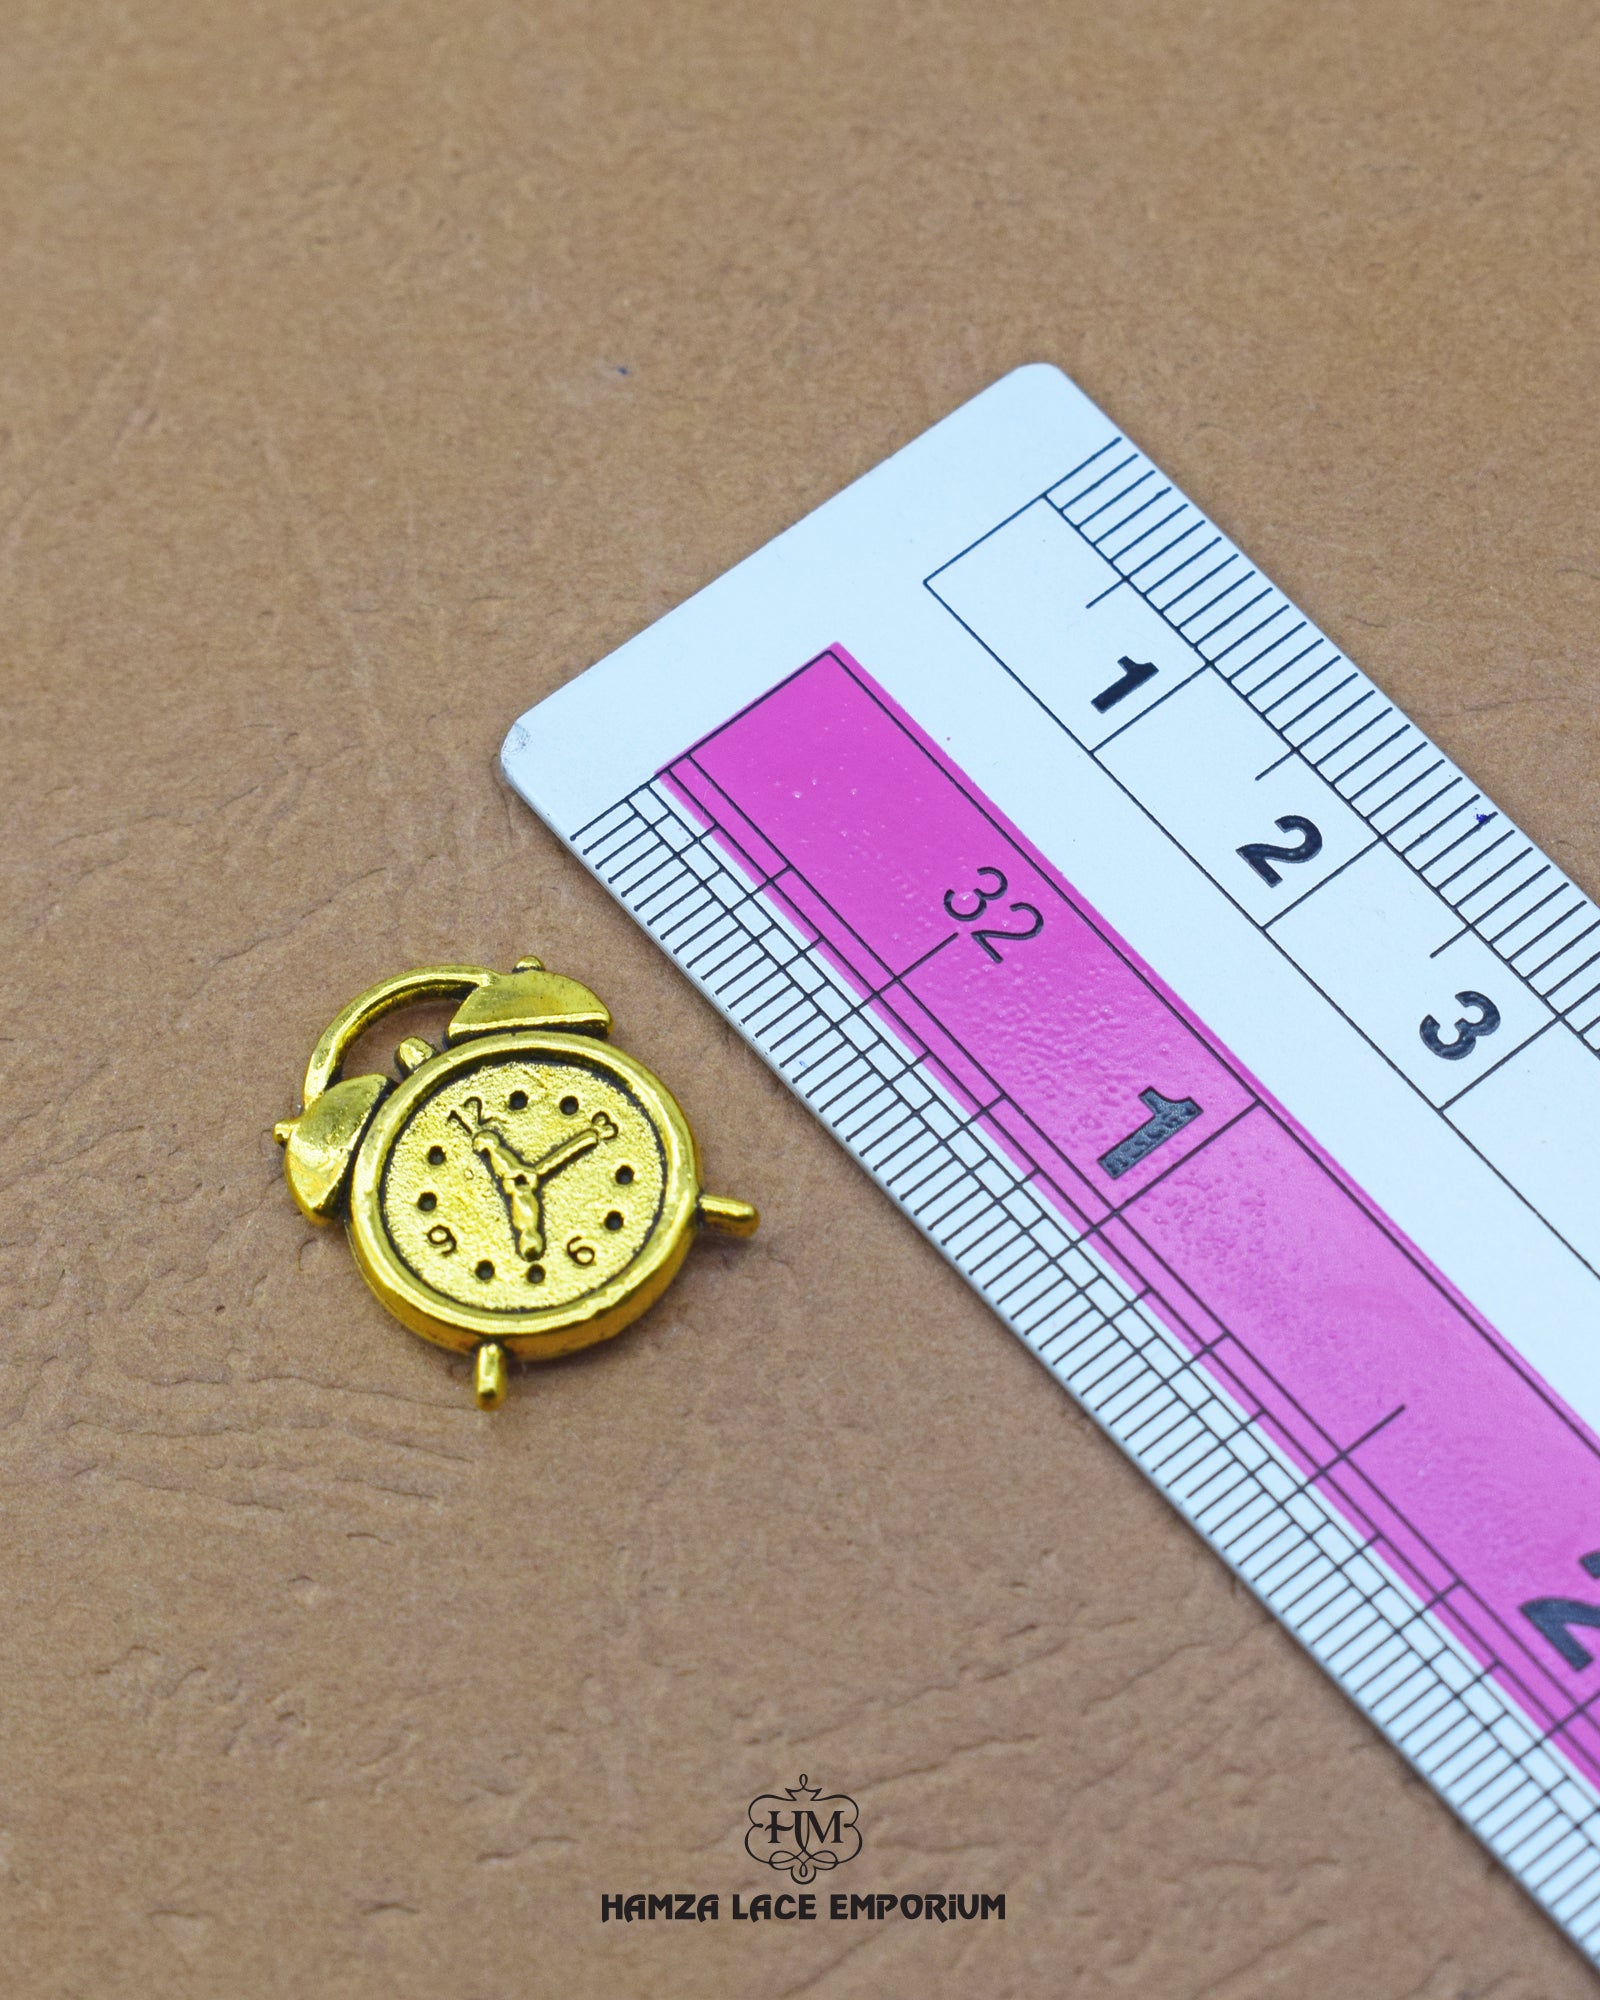 The size of the 'Clock Design Metal Button MA668' is indicated using a ruler.